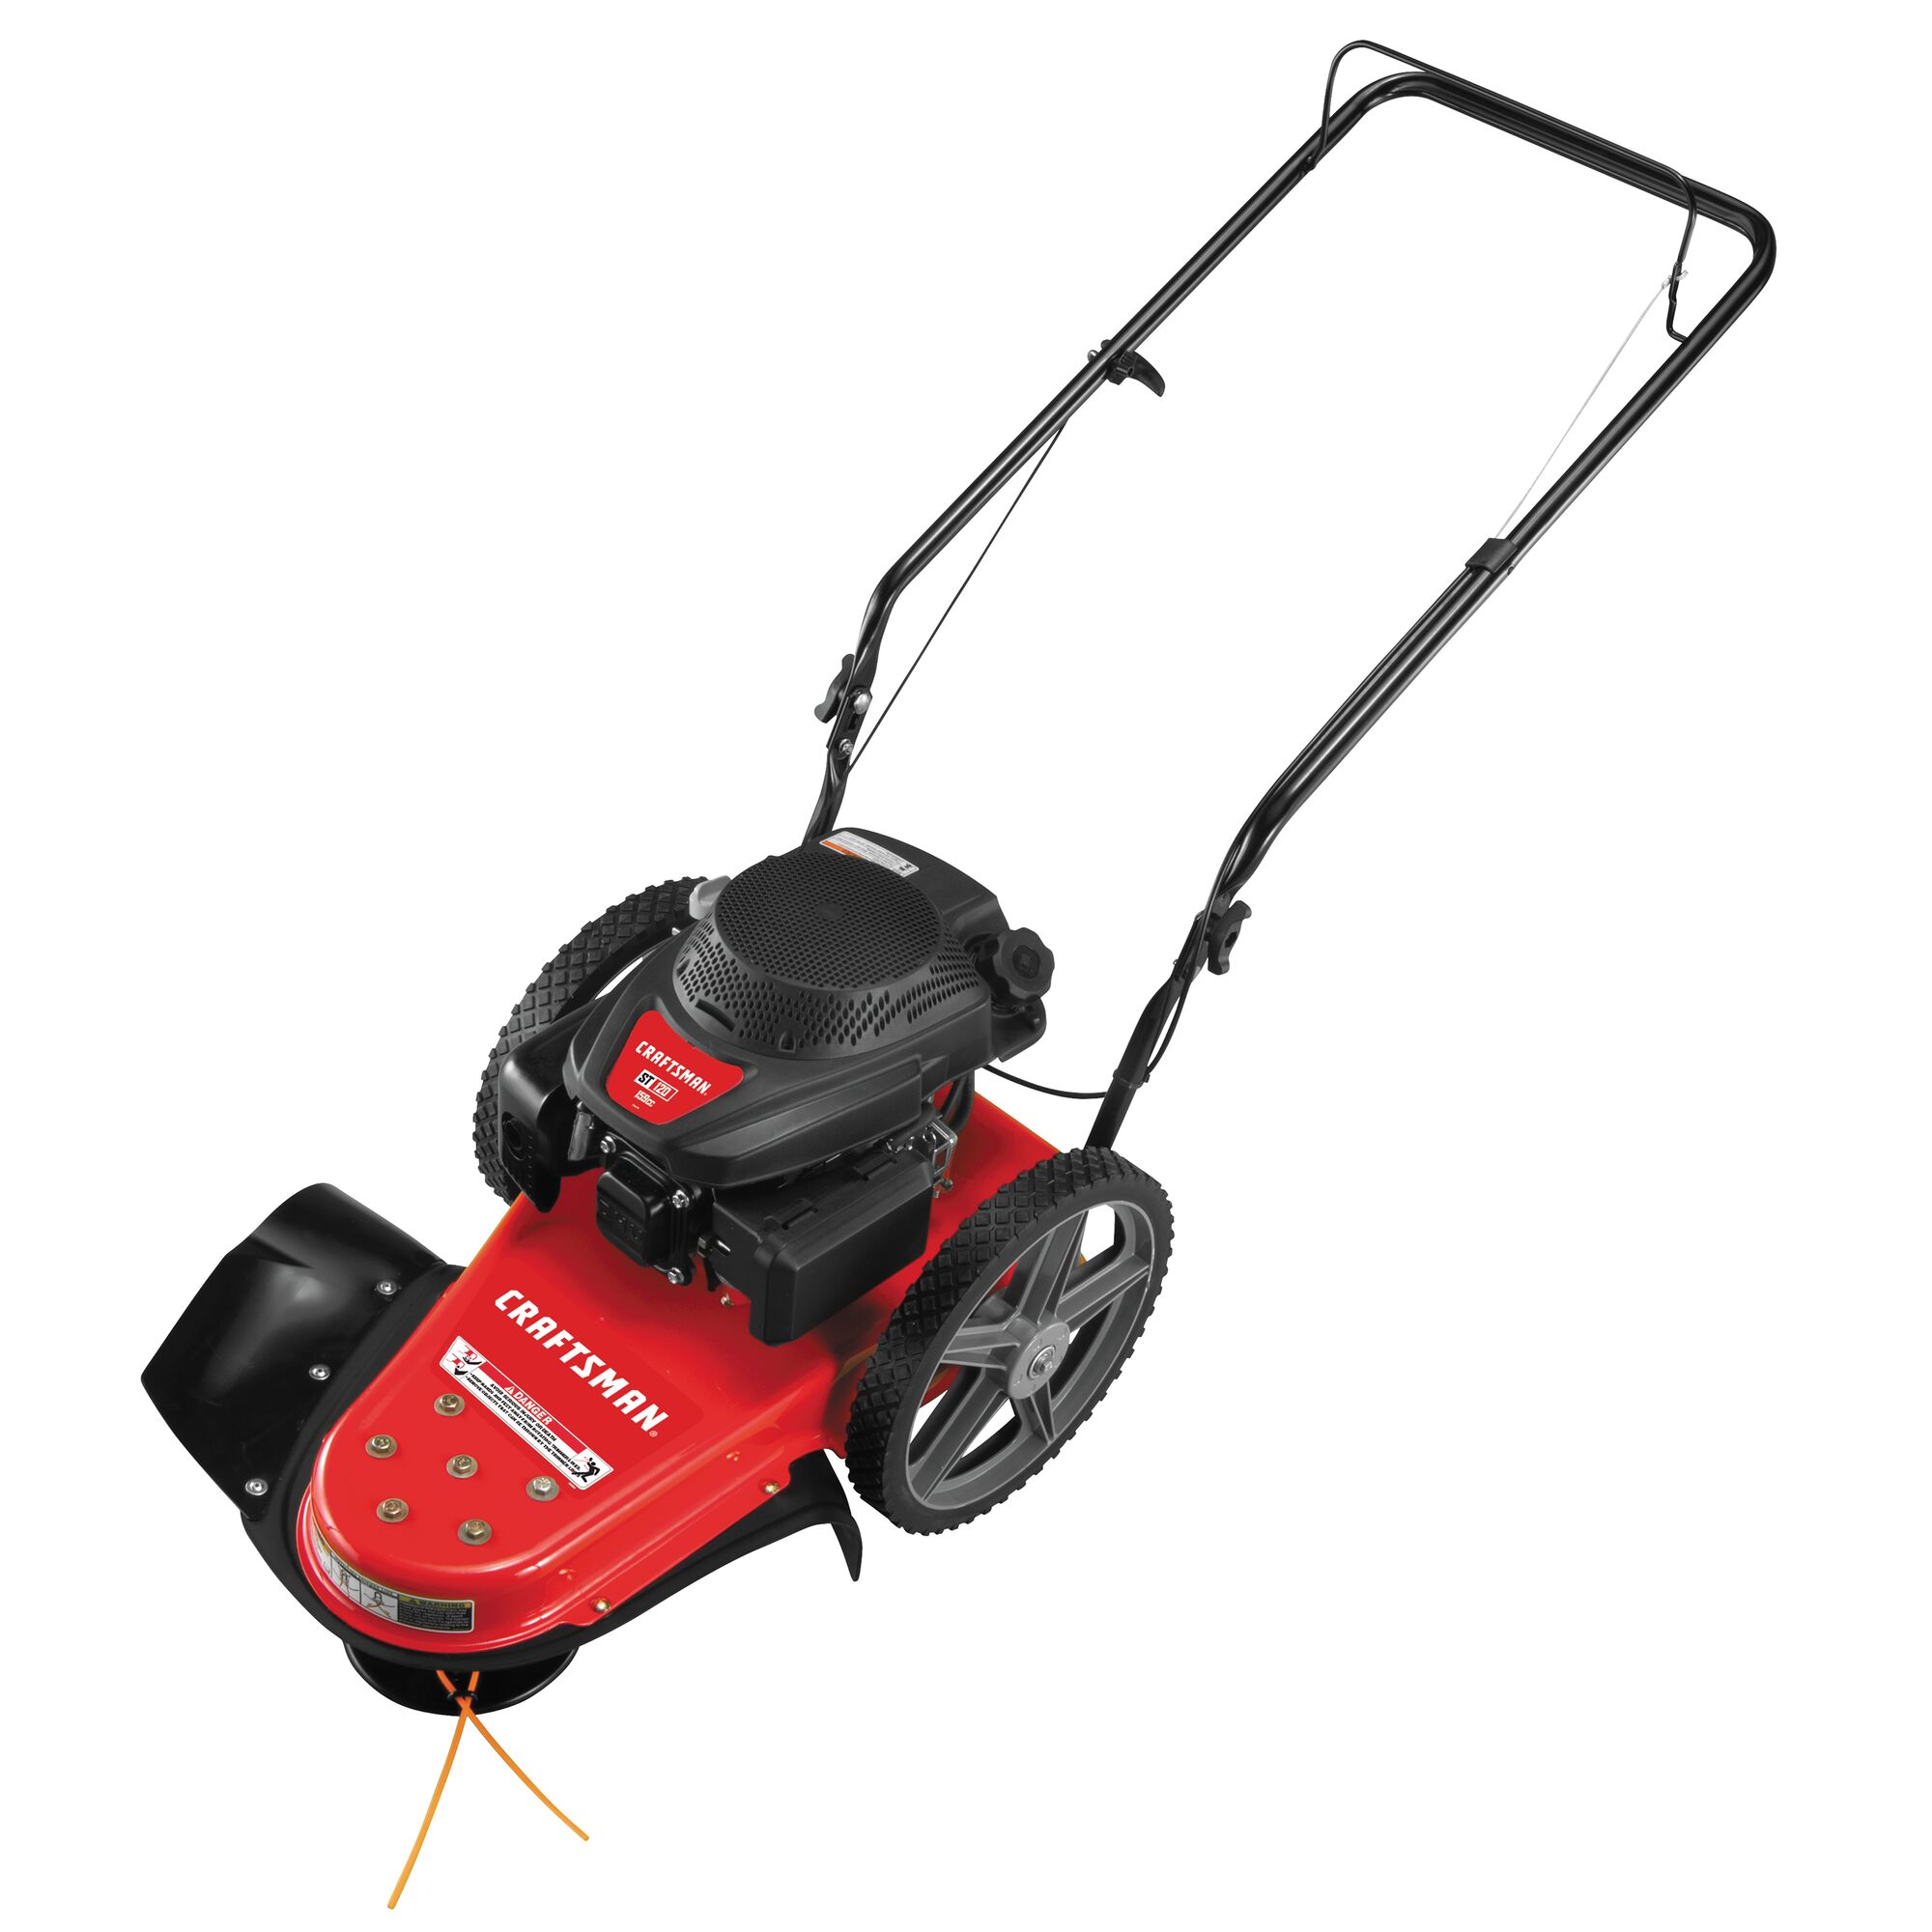 Overhead view of Wheeled string trimmer.